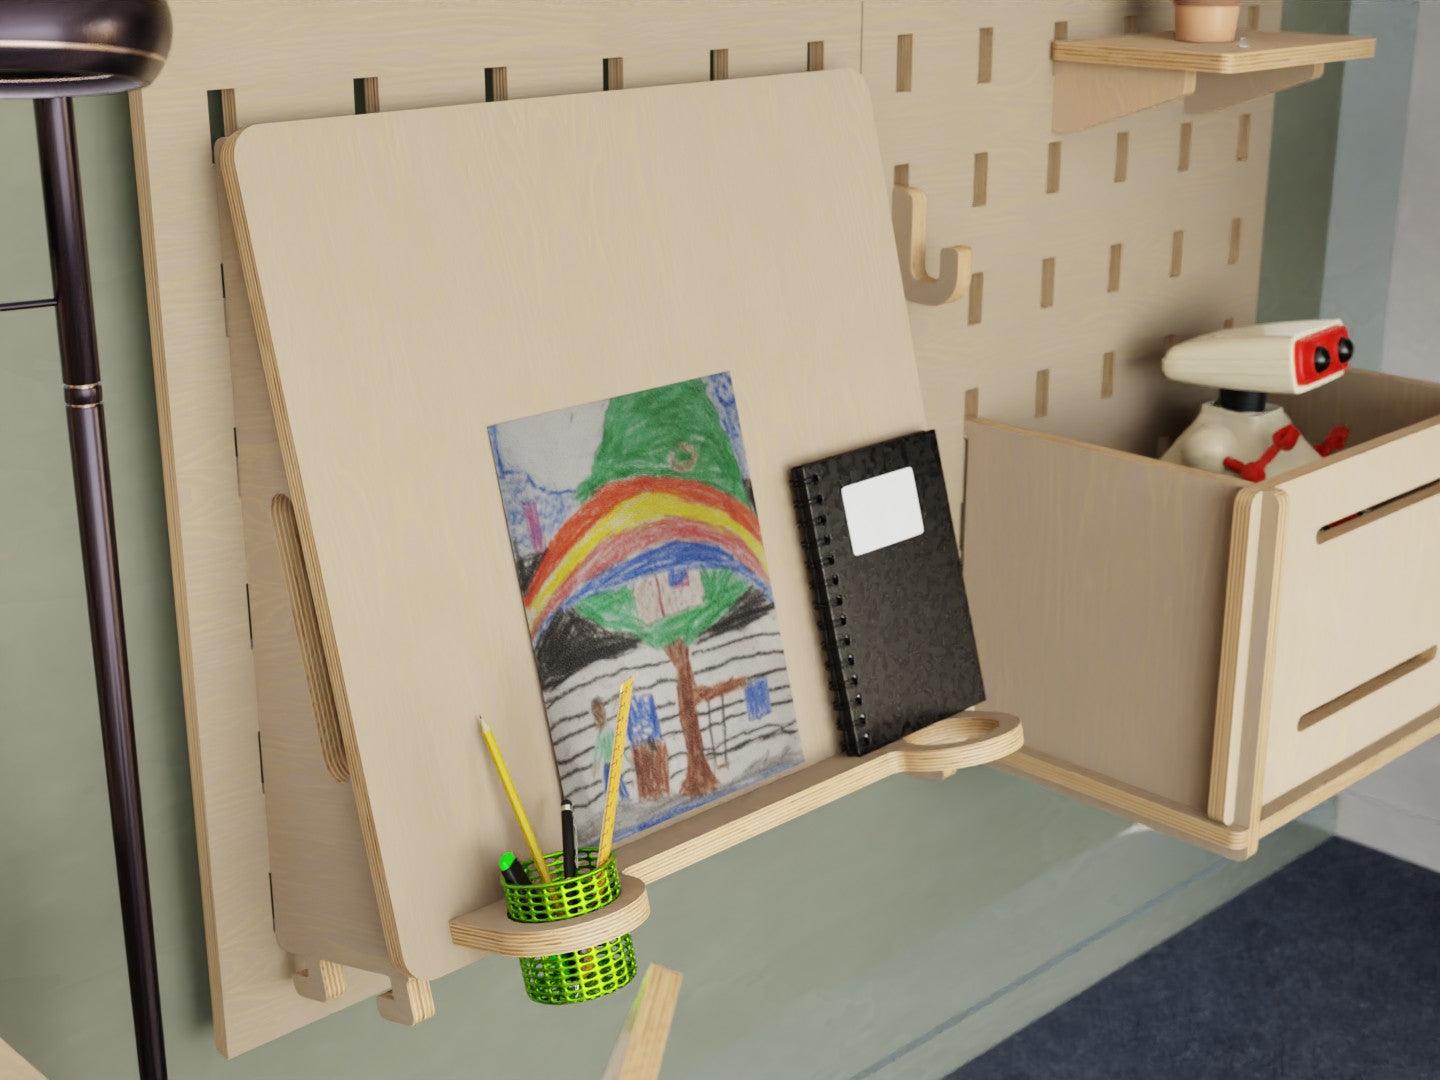 Our plywood pegboard & desk-easel - a perfect blend of creativity and tidiness. Let your little one's imagination run wild!